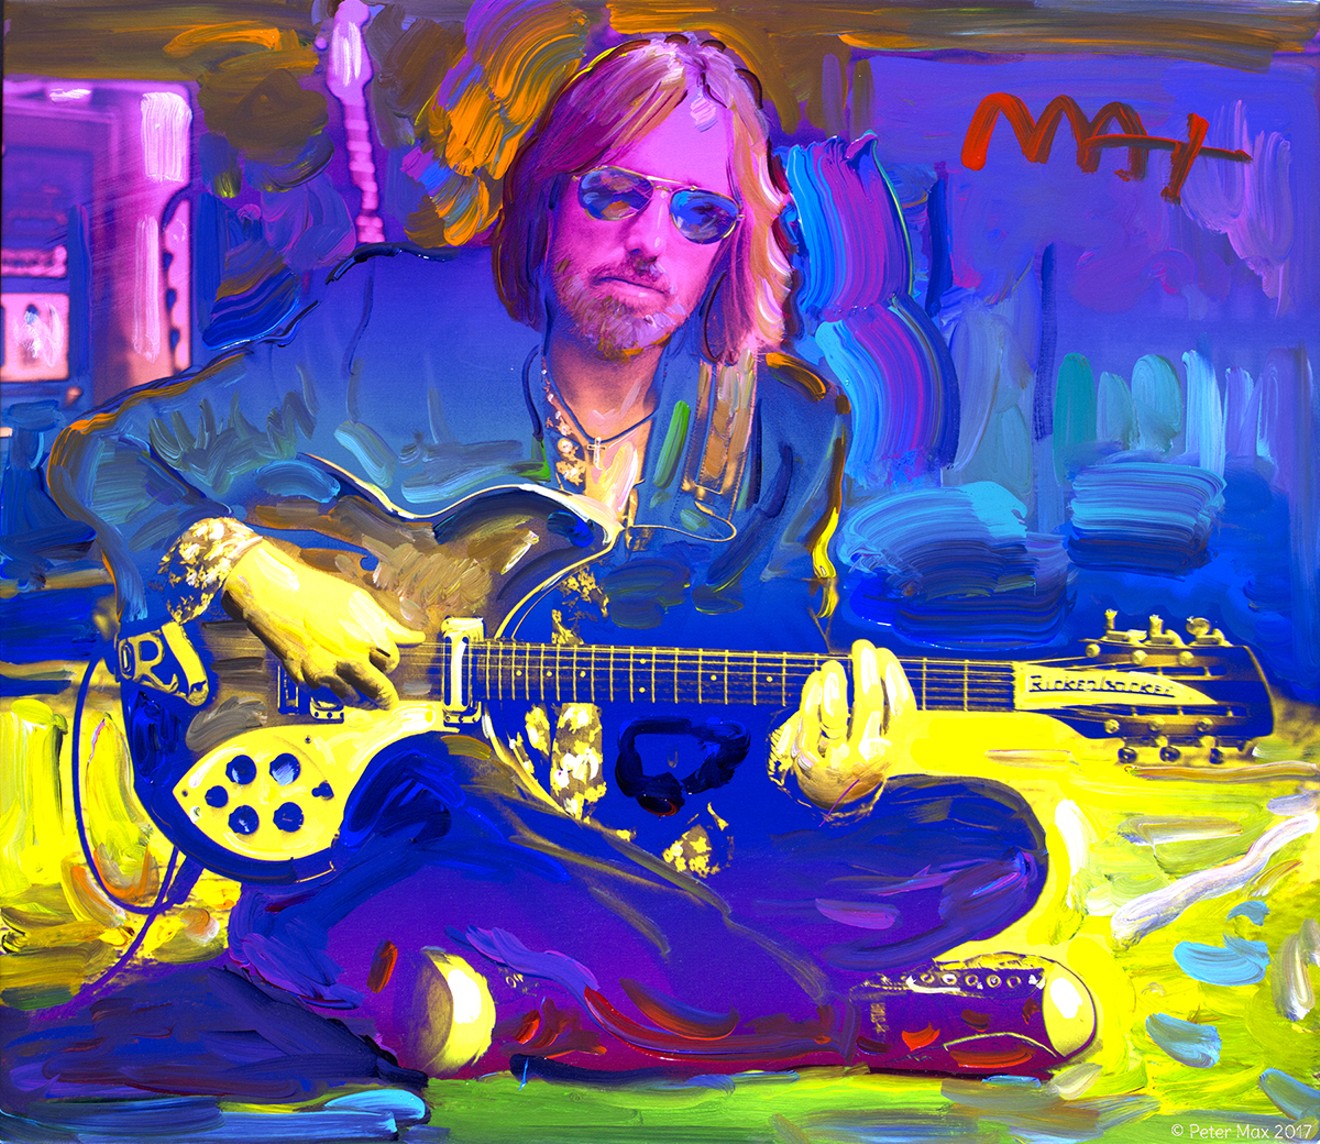 Tom Petty by Peter Max. A Max retrospective opens August 17 at Off the Wall Gallery.